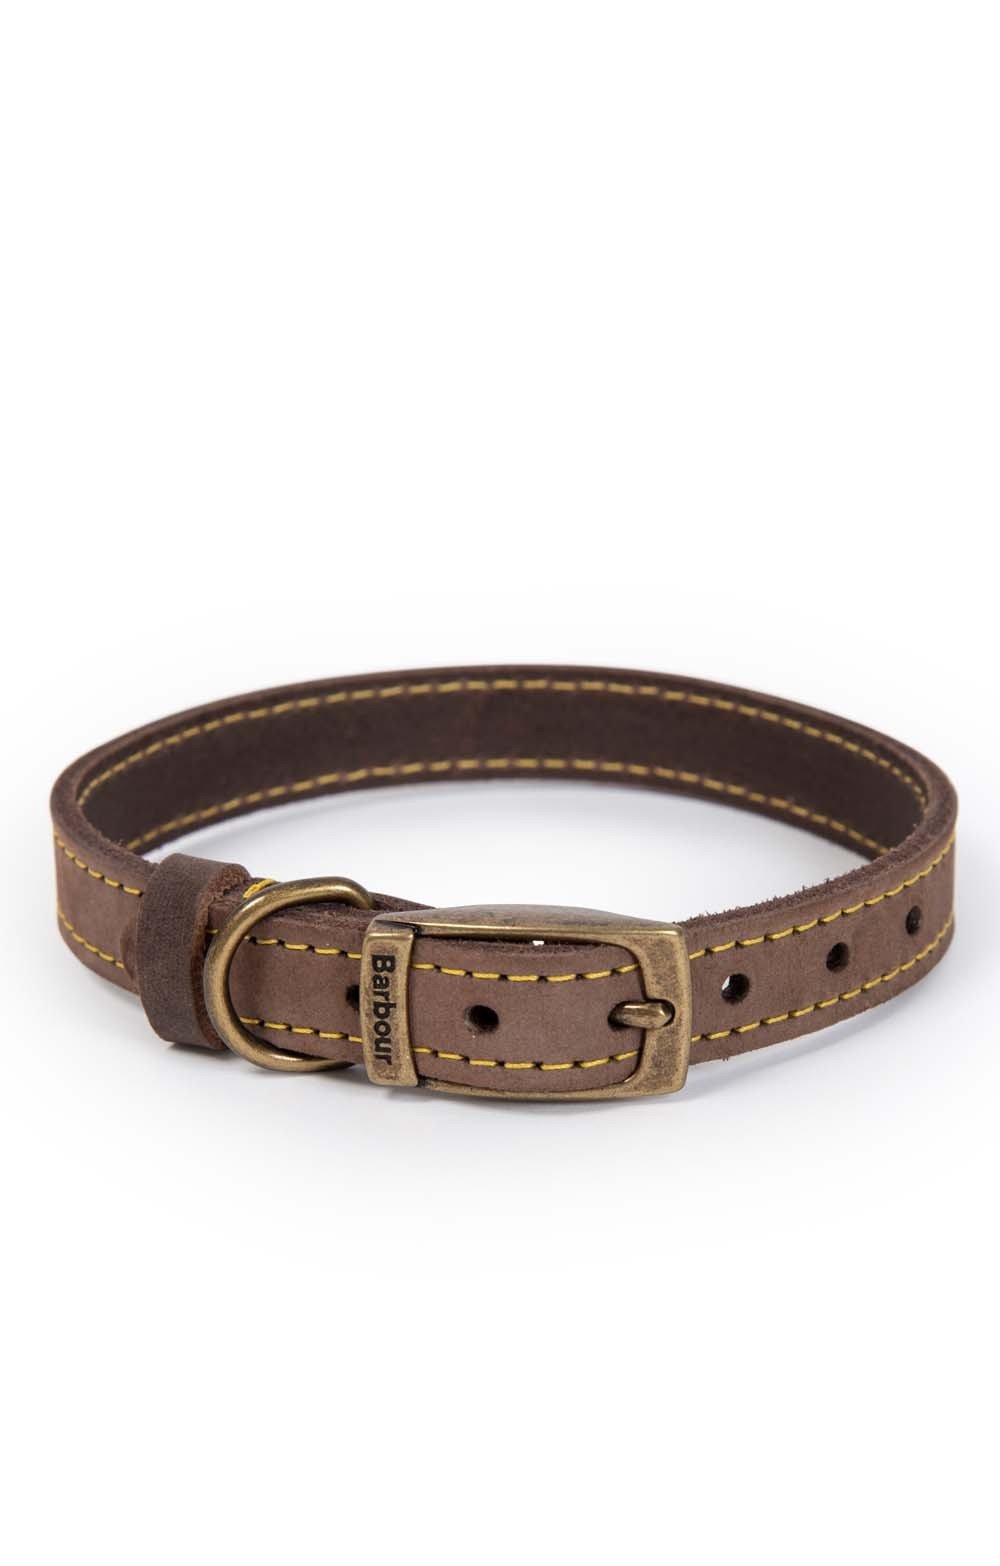 Barbour Leather Dog Collar - House of Bruar